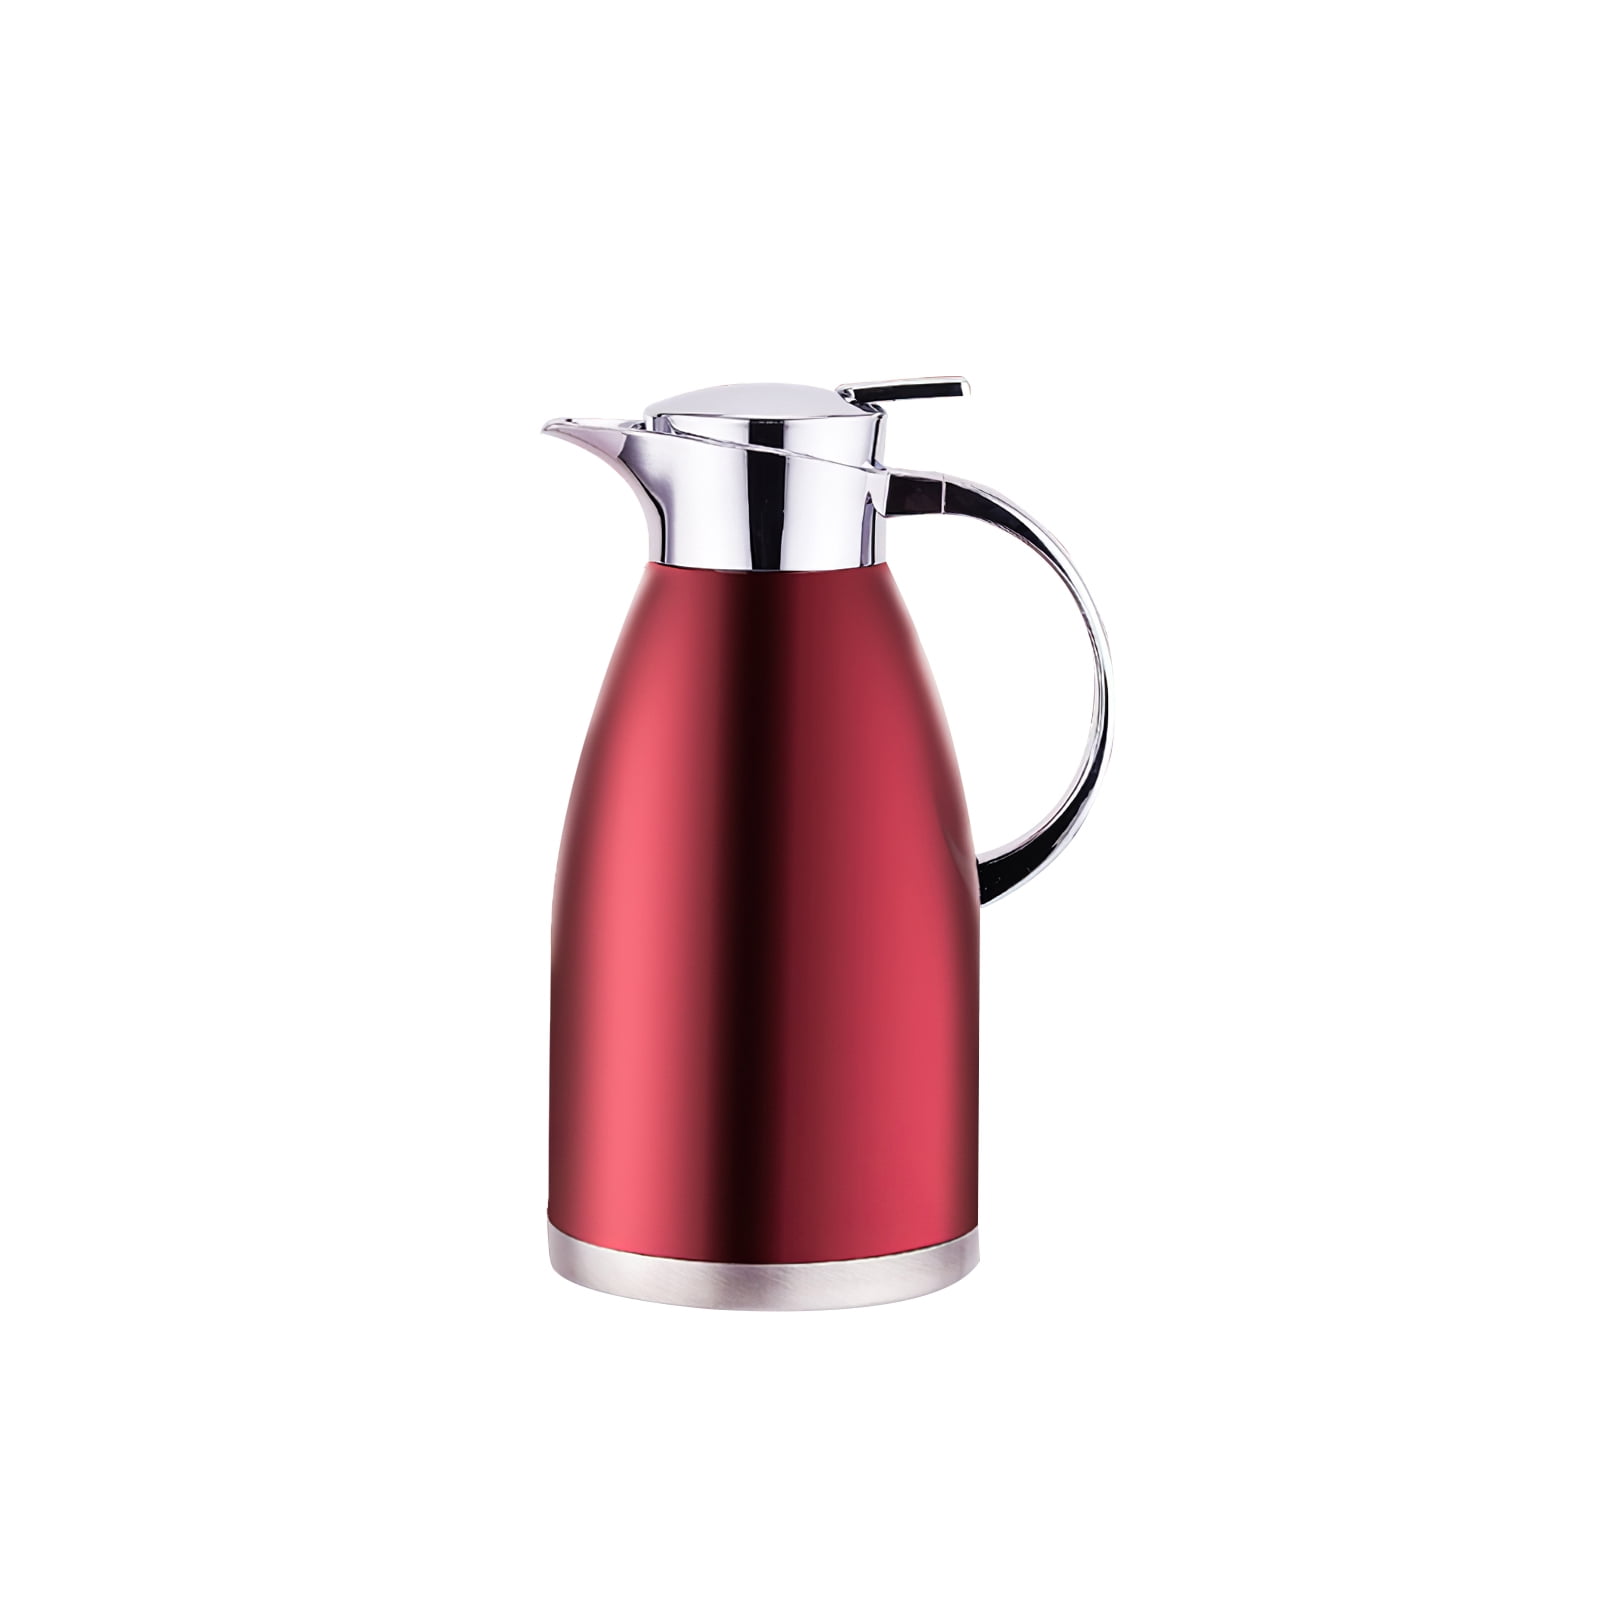  Coffee carafe & Tea carafe in one. 68oz 12hr heat retention  ideal for coffee carafes for keeping hot, 24hr cold retention. Thermal  Stainless Steel double walled insulated carafe. Infuser & Brush